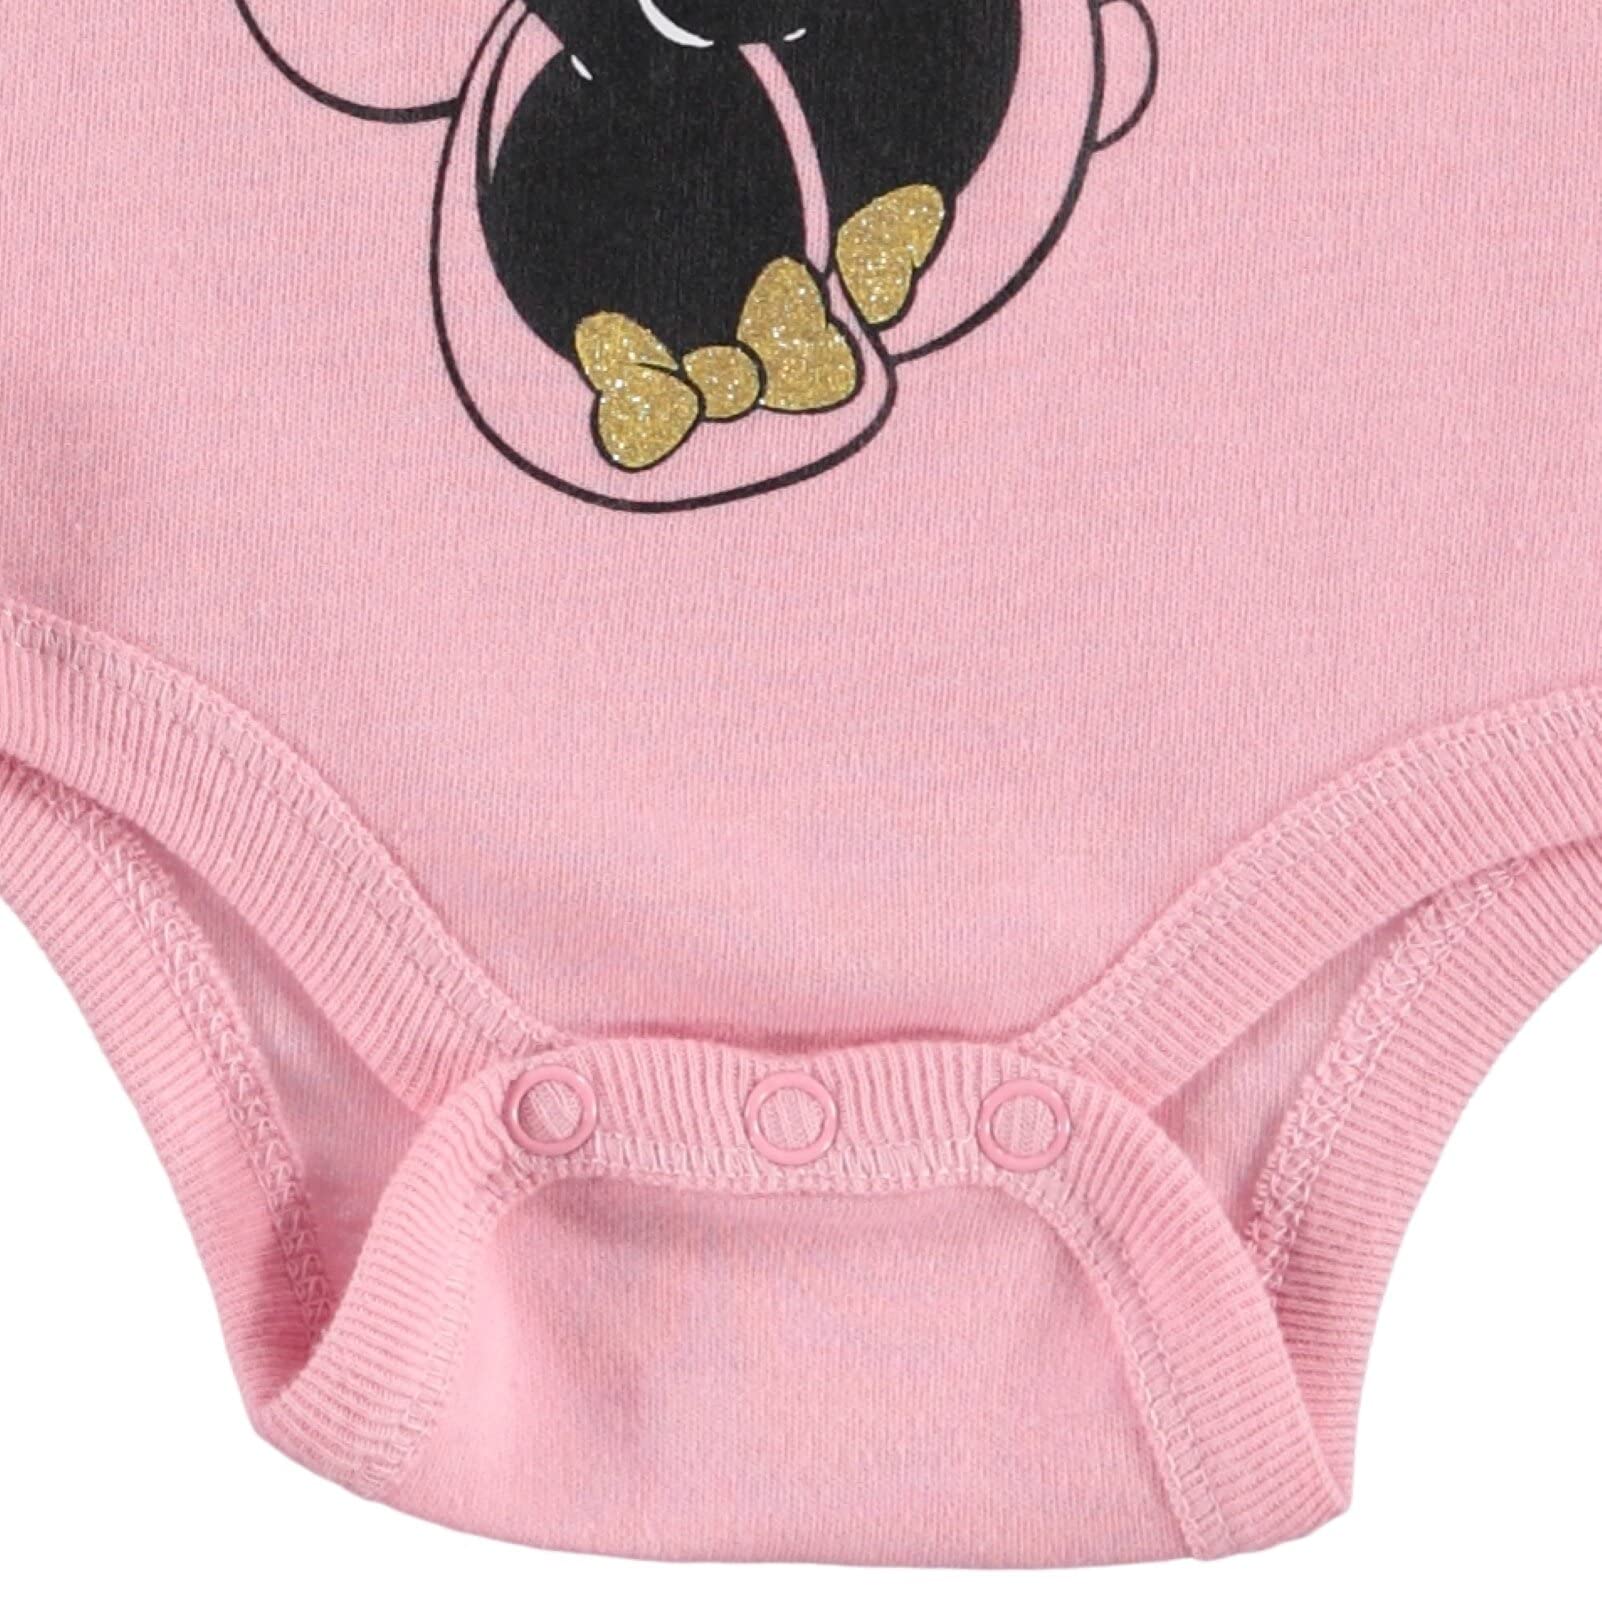 Disney Minnie Mouse Baby Girls Bodysuit Pants Bib and Hat 4 Piece Outfit Set Newborn to Infant